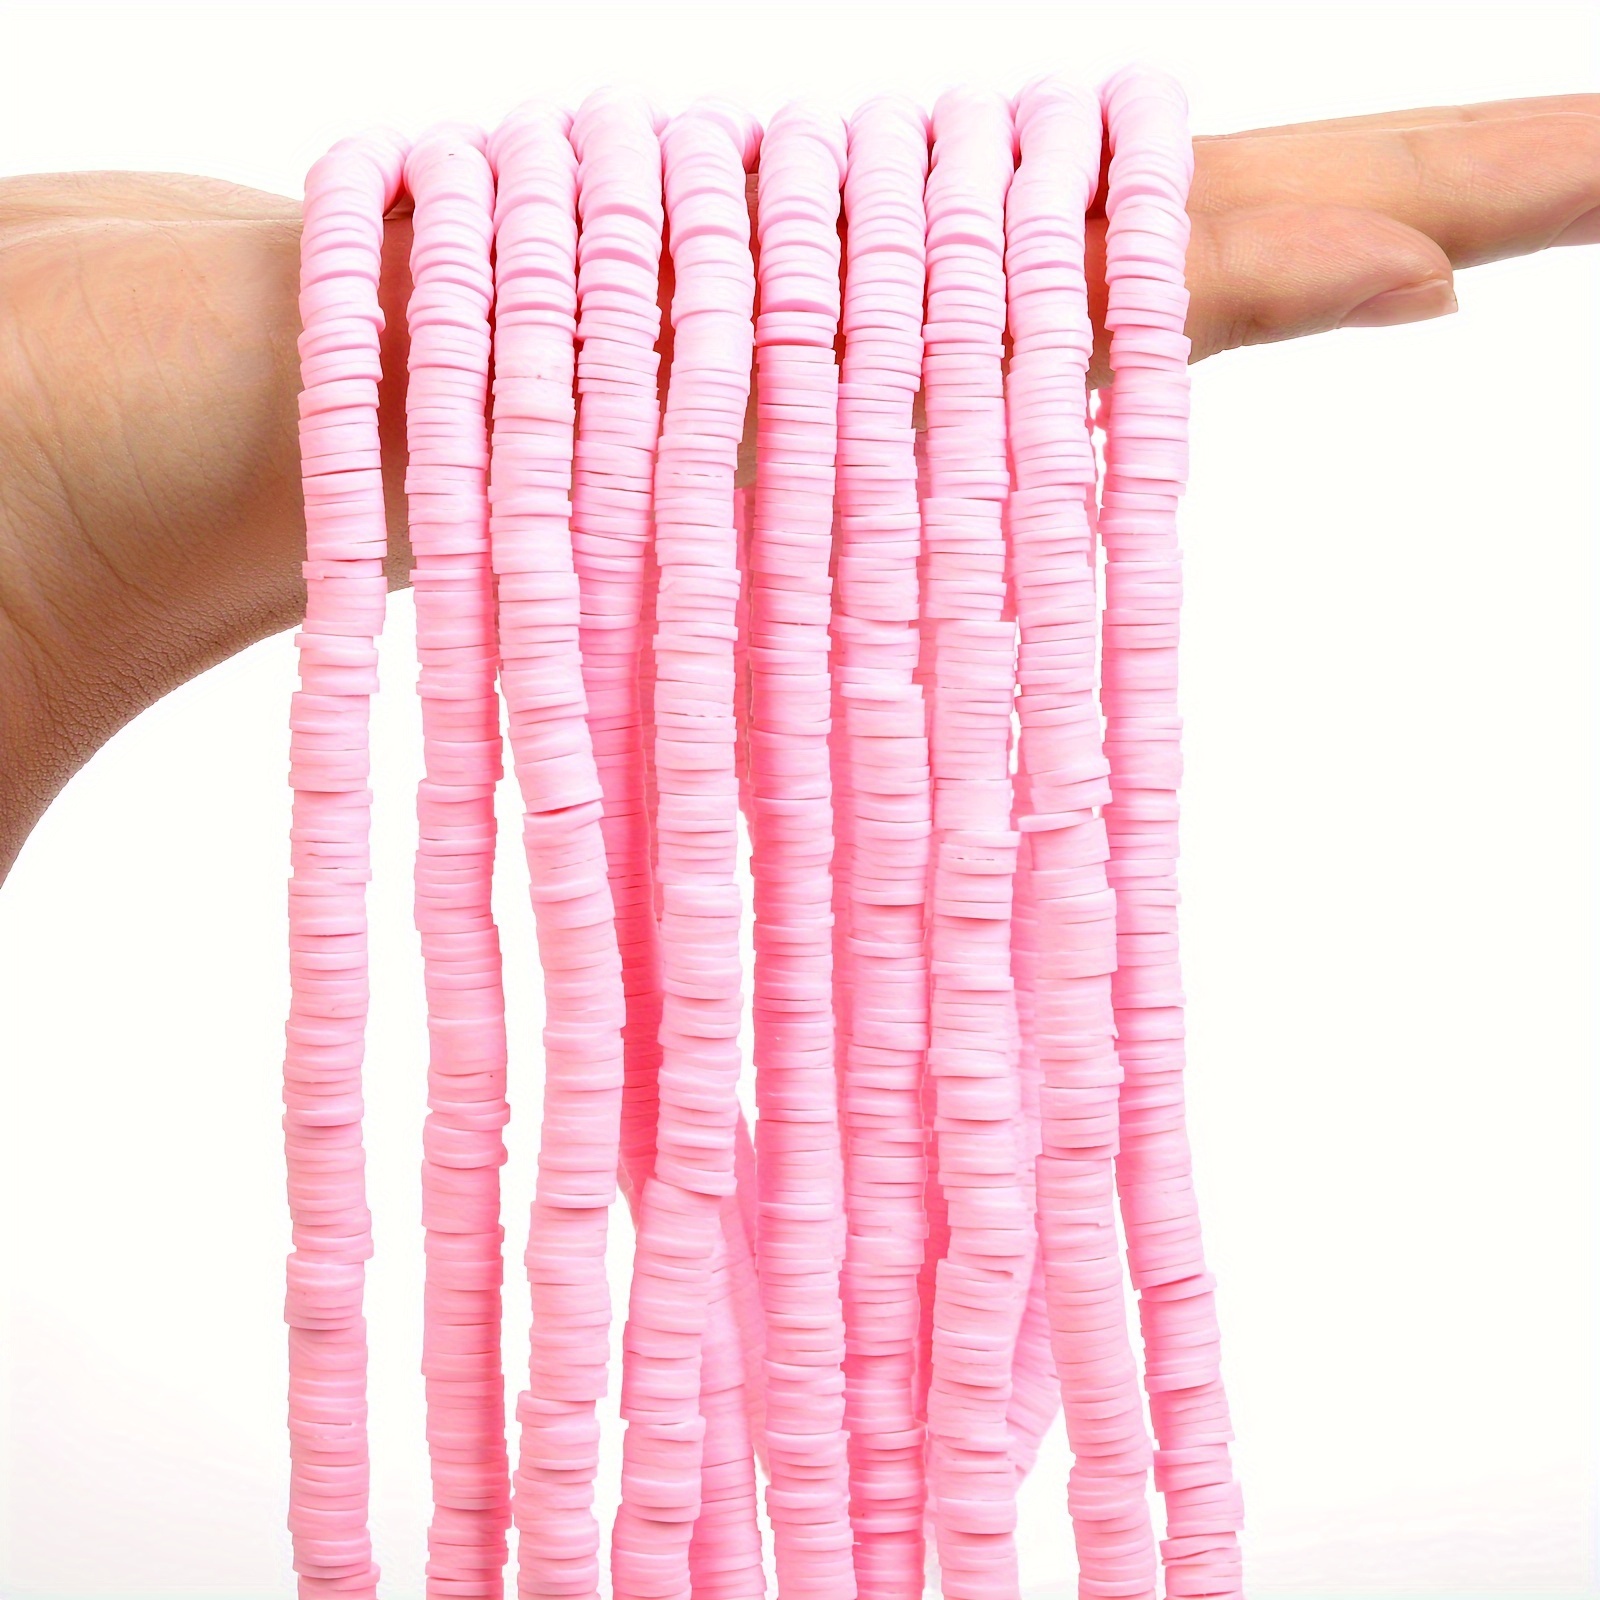 380pcs White Clay Beads Chip Strip 6mm Flat Round Polymer Disk Loose Spacer Heishi Beads for Handmade DIY Jewelry Making Bracelets Flat Polymer Clay